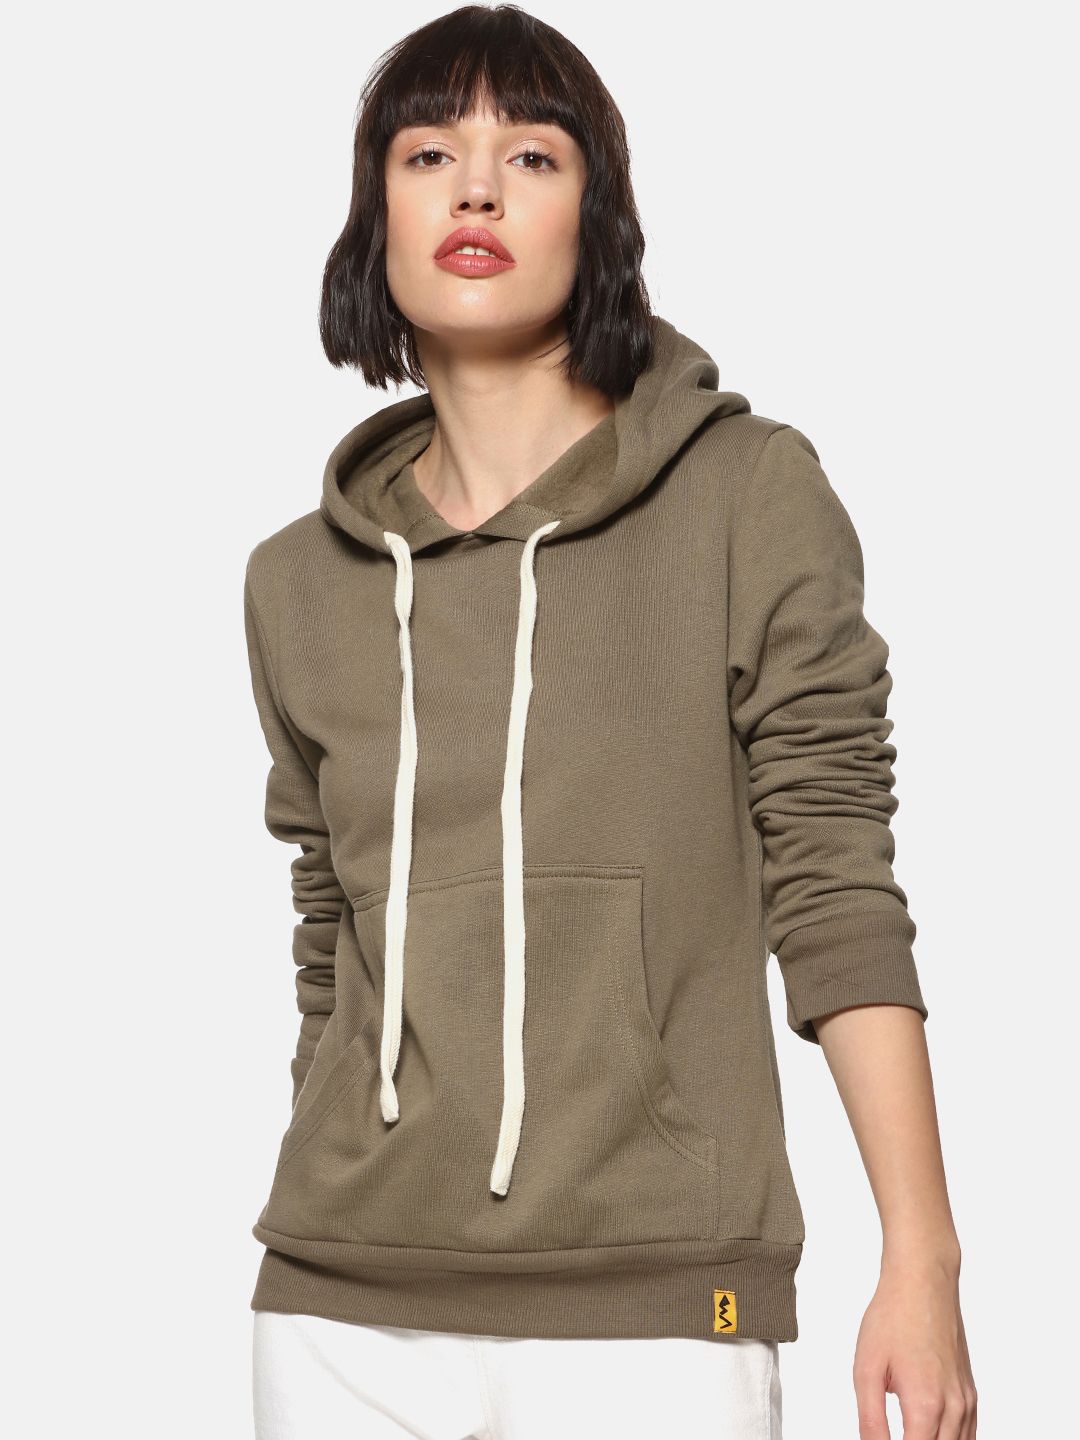 Campus Sutra Women Olive Green Solid Hooded Sweatshirt Price in India